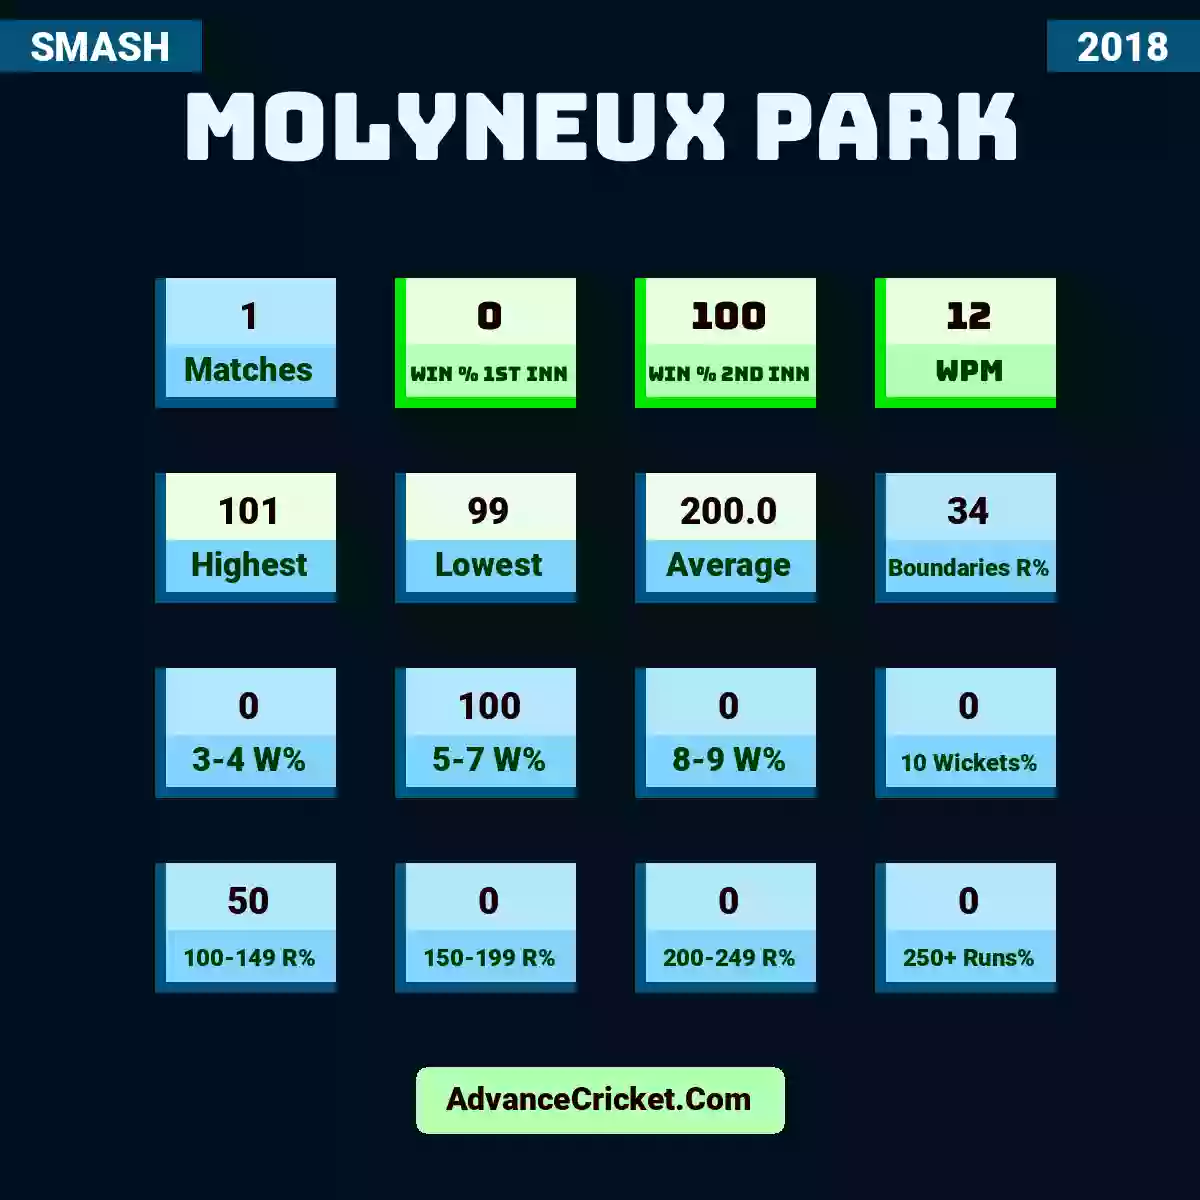 Image showing Molyneux Park with Matches: 1, Win % 1st Inn: 0, Win % 2nd Inn: 100, WPM: 12, Highest: 101, Lowest: 99, Average: 200.0, Boundaries R%: 34, 3-4 W%: 0, 5-7 W%: 100, 8-9 W%: 0, 10 Wickets%: 0, 100-149 R%: 50, 150-199 R%: 0, 200-249 R%: 0, 250+ Runs%: 0.